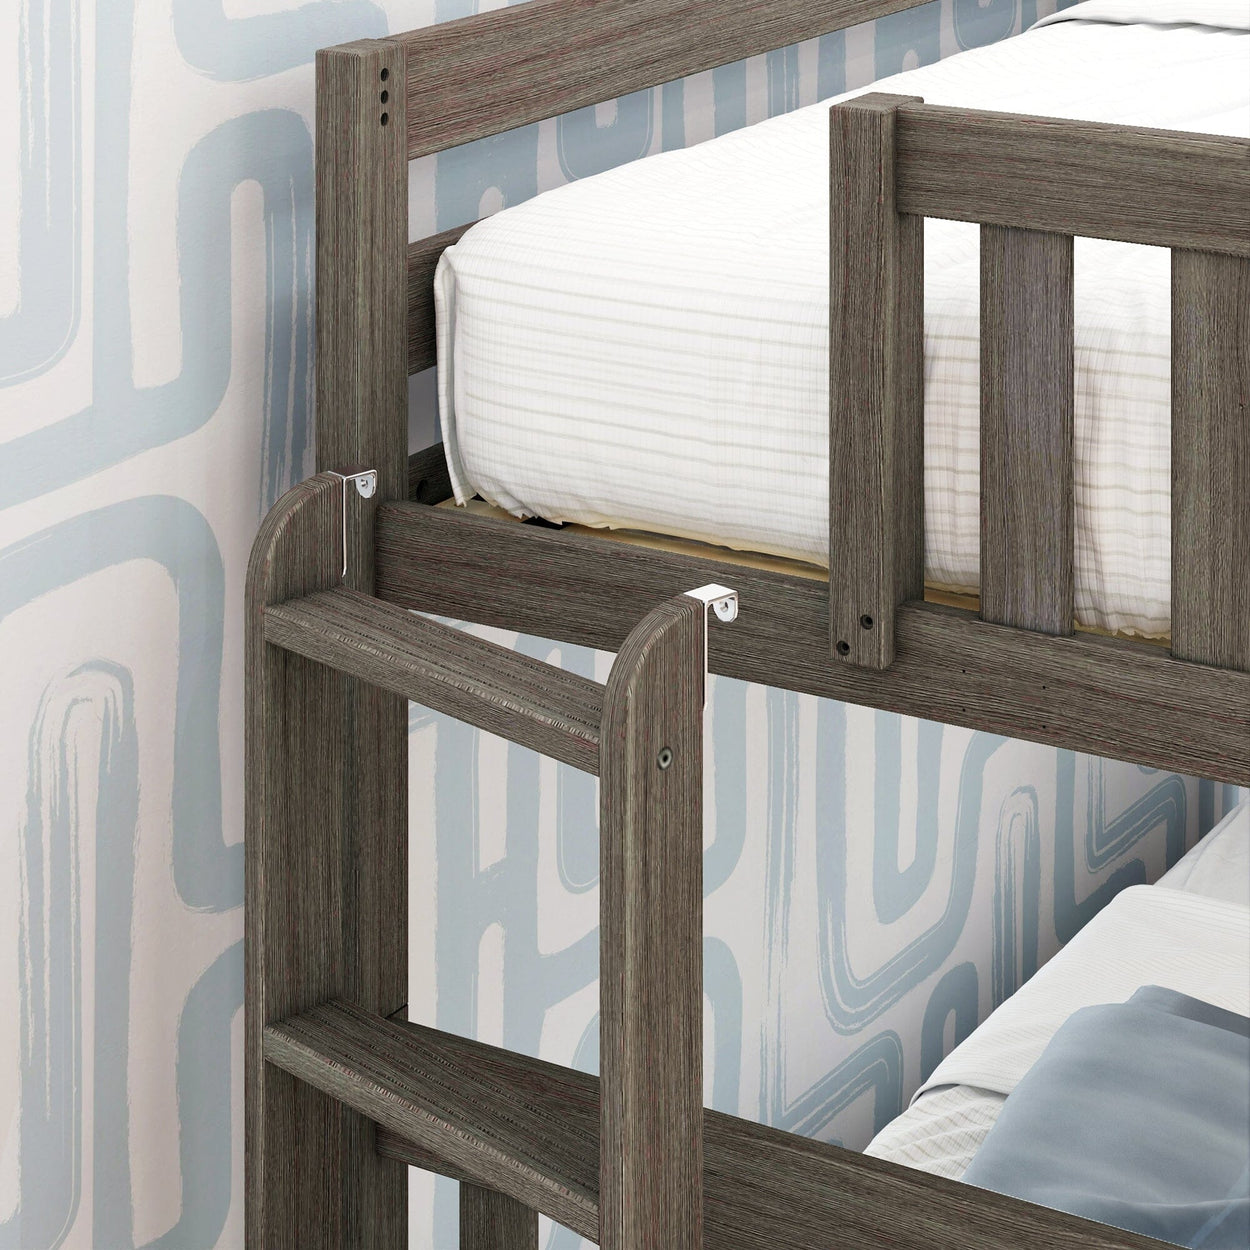 187335-151 : Bunk Beds Twin over Full Bunk Bed with Ladder on End and Storage Drawers, Clay